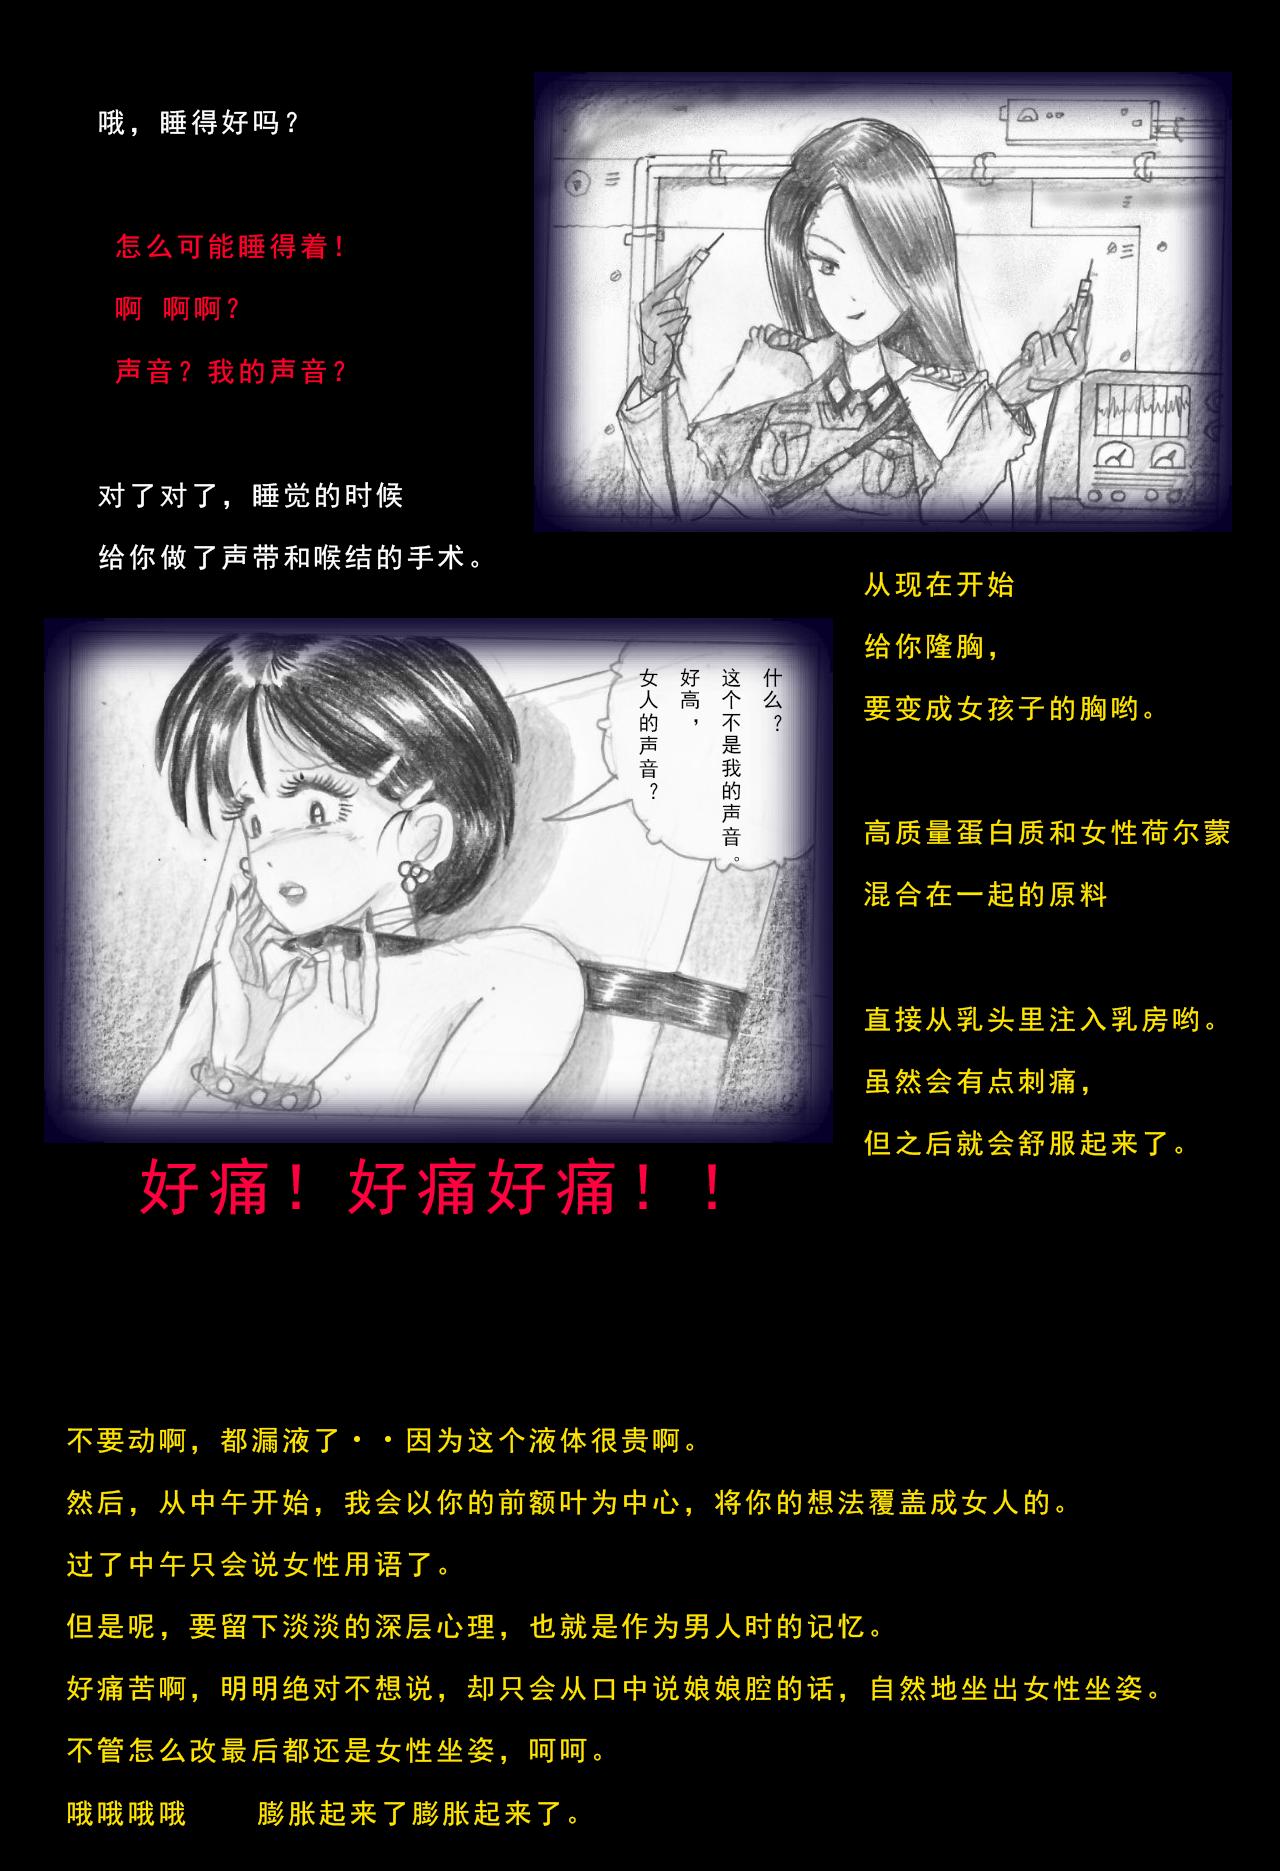 Special Police Third Platoon Captain Abduction Restraint Edition【chinese】 9